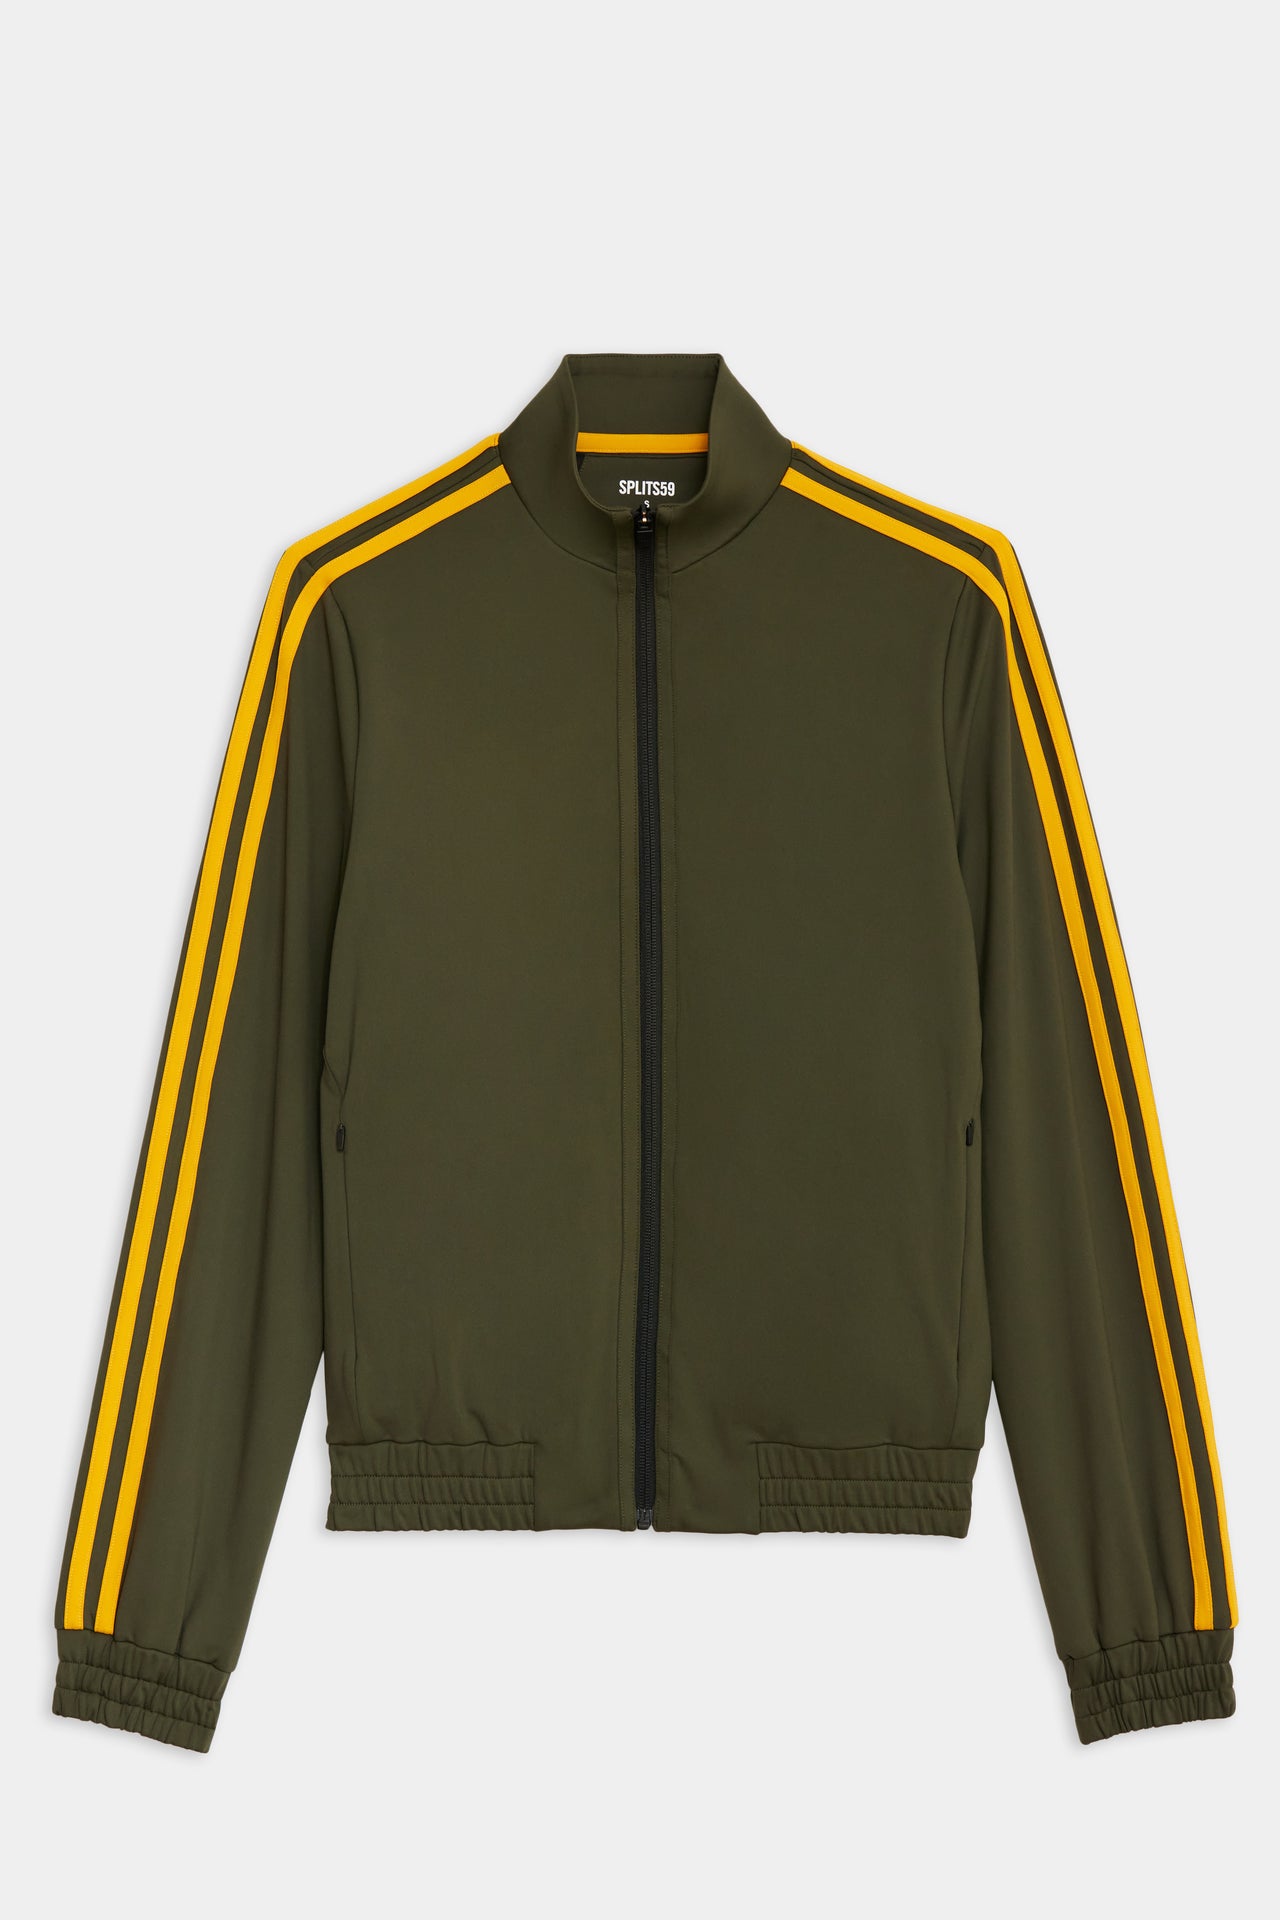 Flat view of dark green sweatshirts with two yellow stripes down the side